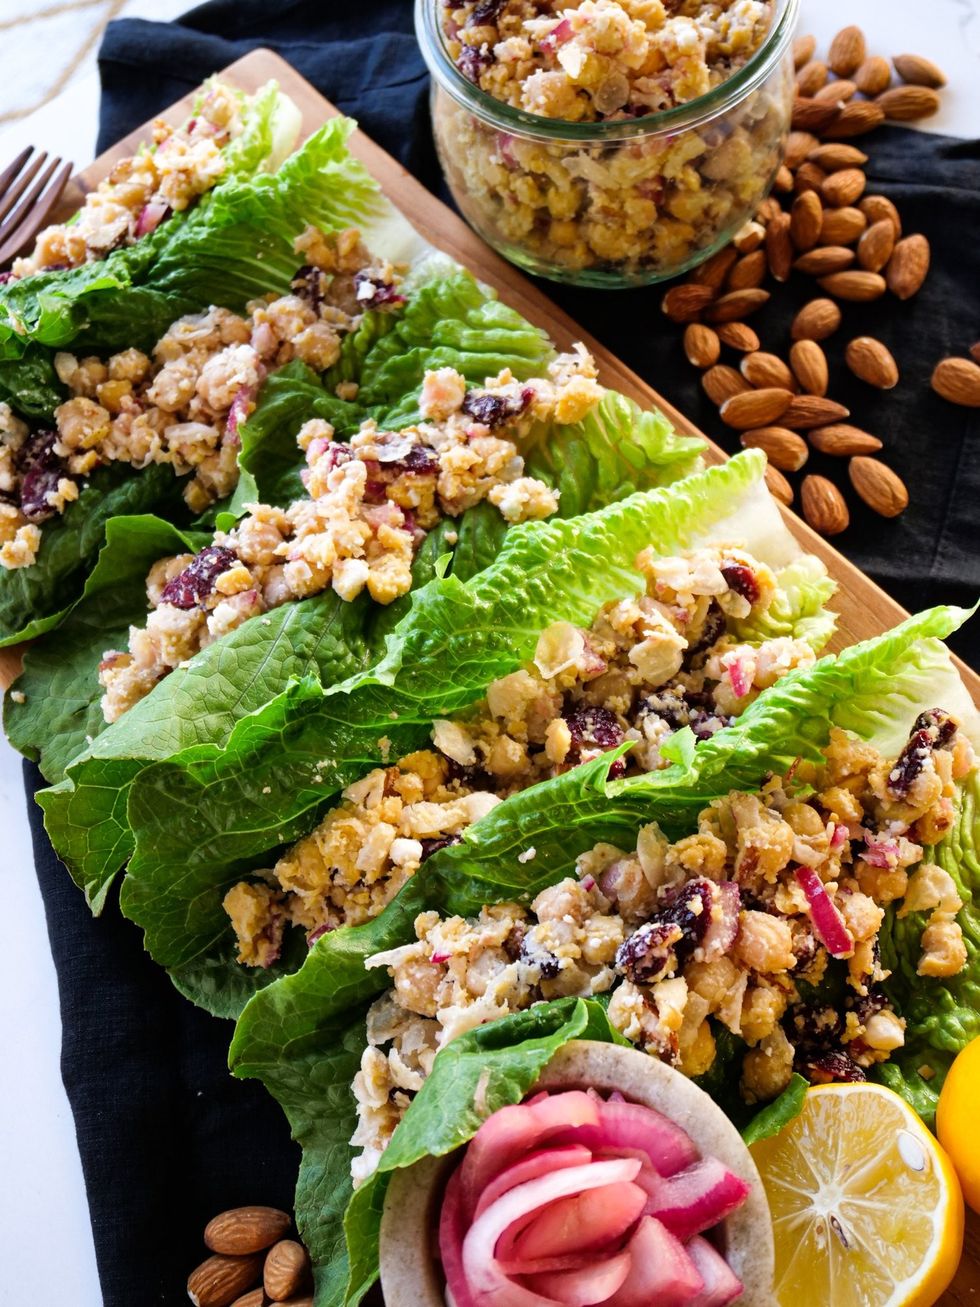 vegan lettuce wraps recipe for earth day, vegan cooking for the environment and health